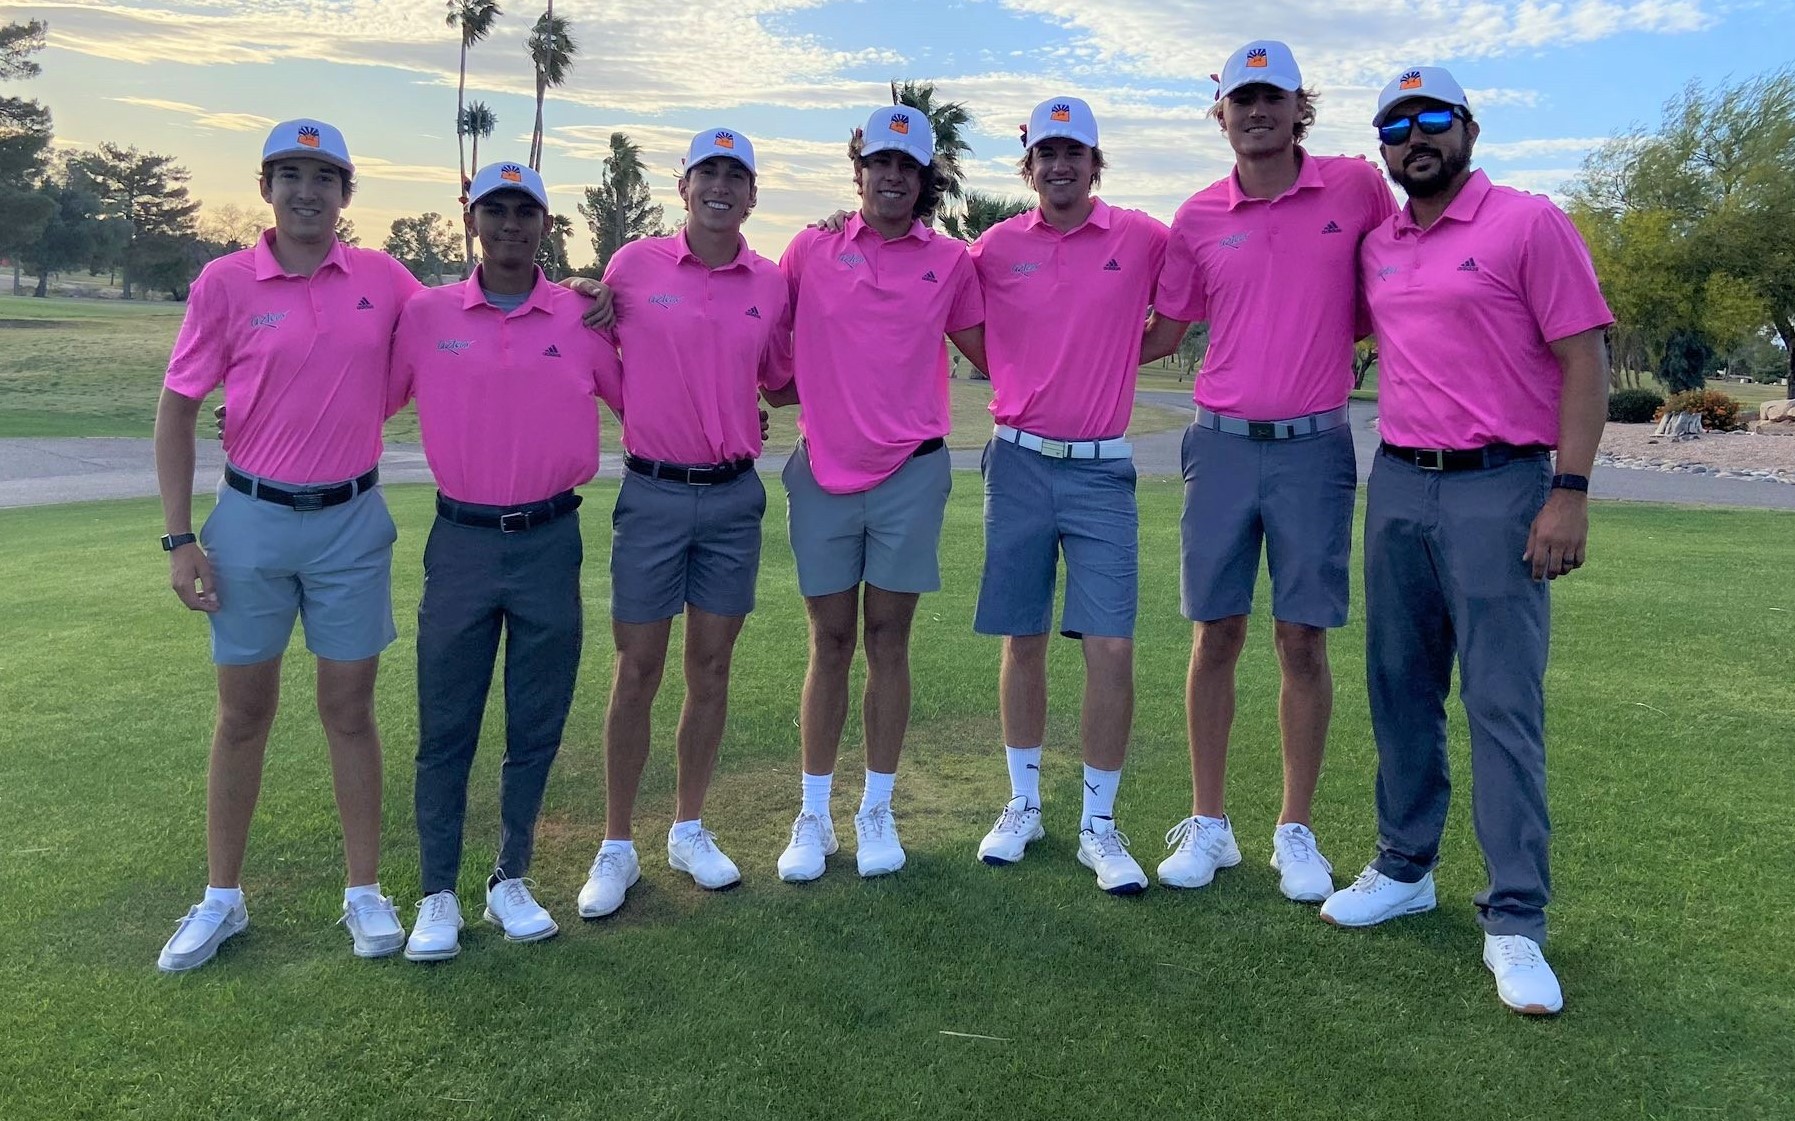 The Aztecs men's golf team finished third at the Paradise Valley Invitational on Tuesday with a two-day score of 584 (297-287). Freshmen Jay Shero (74-71-145) and Andrew Rivas (77-70-147) shot season-best rounds while Daniel Henely tied his season-best score with a 146 (71-75). The Aztecs compete at the NJCAA Region I, Division I Tournament in Sun City West, AZ on April 28-May 1. (Left to Right): Andrew Rivas, AJ Quihuis, Jay Shero, Daniel Henely, Tommy Rosenvall, Caleb Knight and Assistant Coach Landyn Lewis. Photo by Shonda Jones